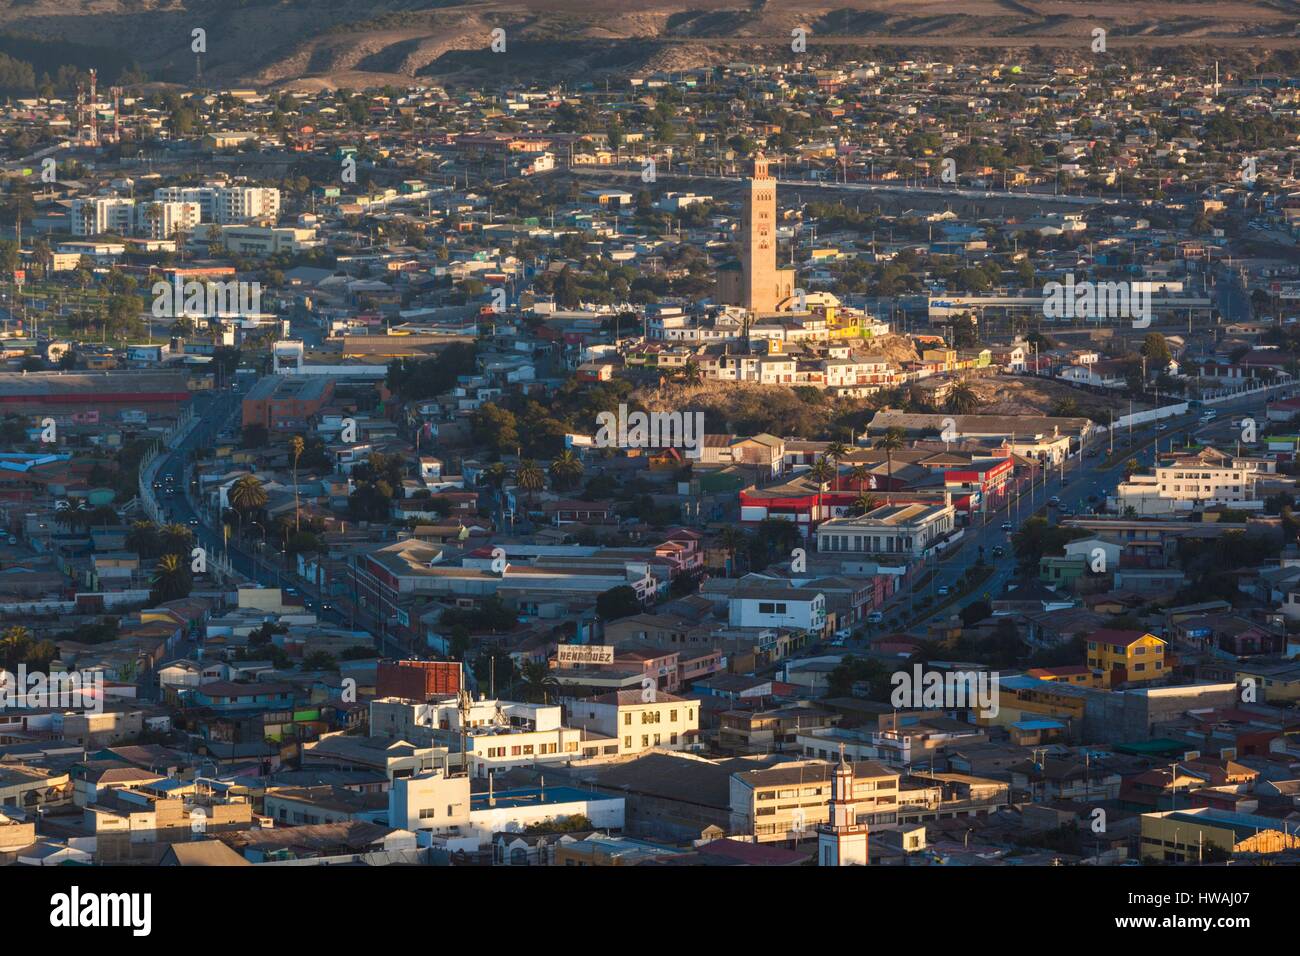 Chile, Coquimbo, elevated city view with Mohammed VI Cultural Center from the Cruz del III Milenio cross, sunset Stock Photo